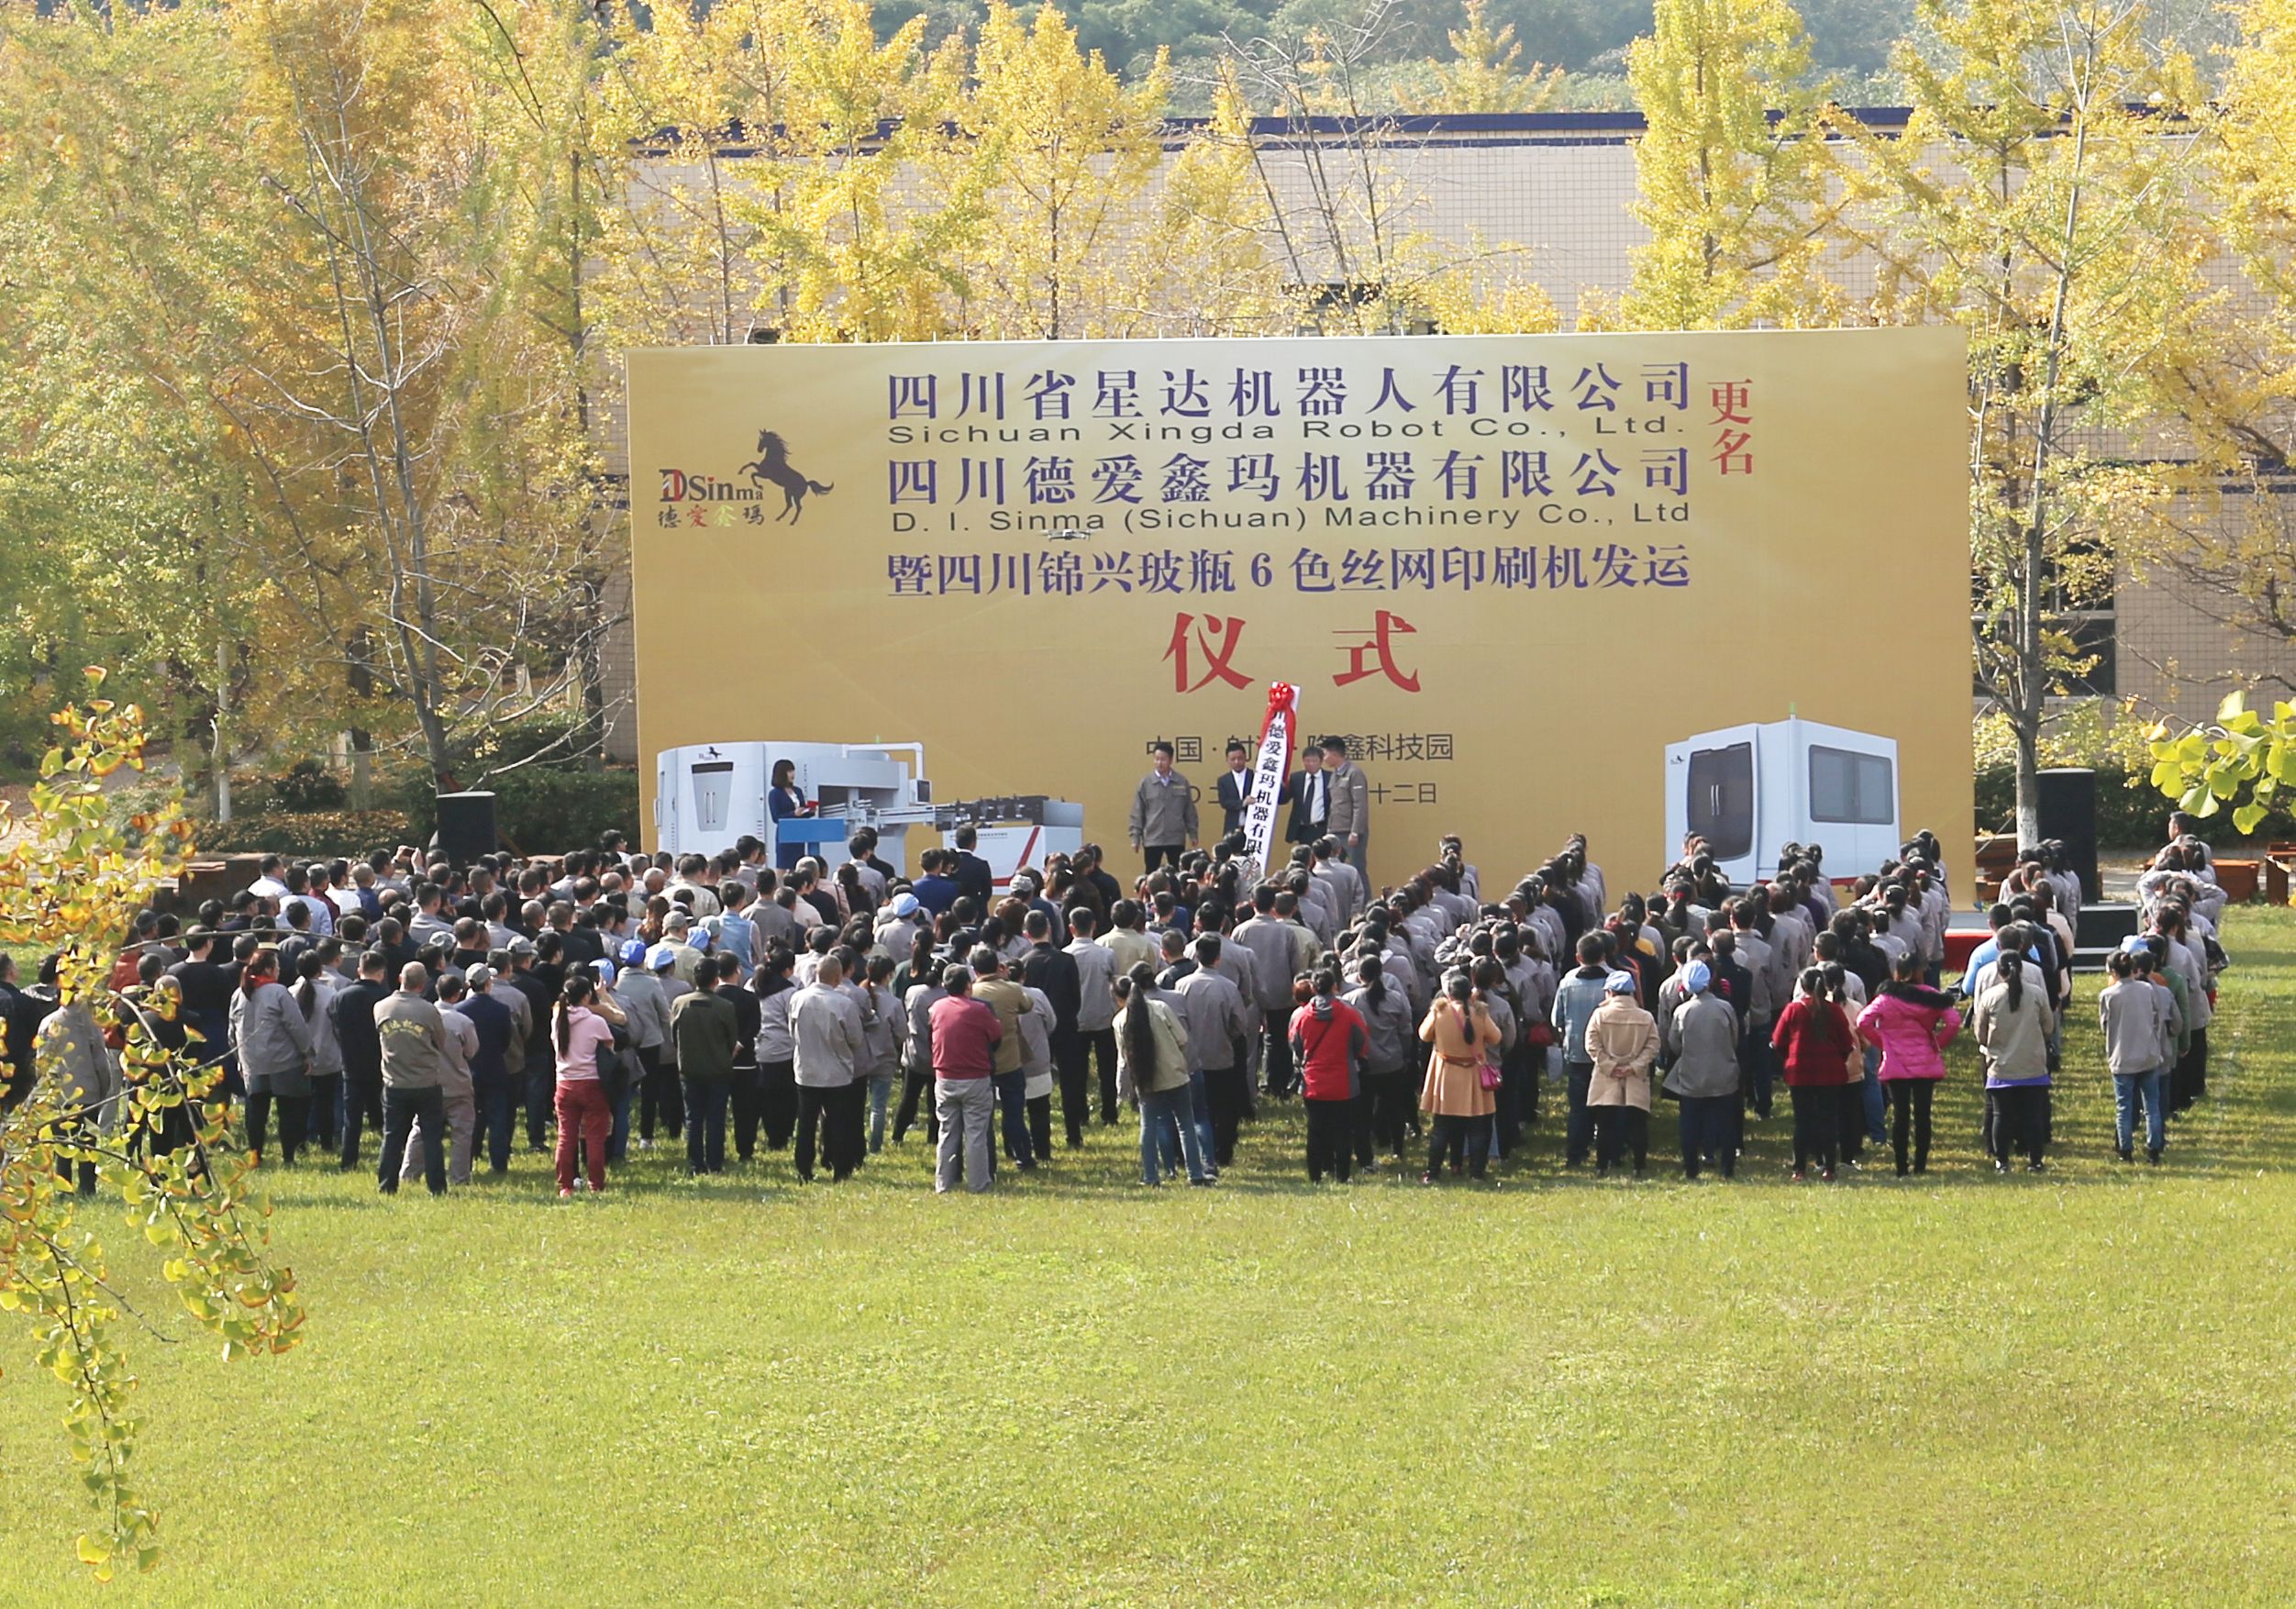 Sichuan Xingda renaming ceremony and Sichuan Jinxing glass bottle 6-color screen printing machine delivery ceremony held